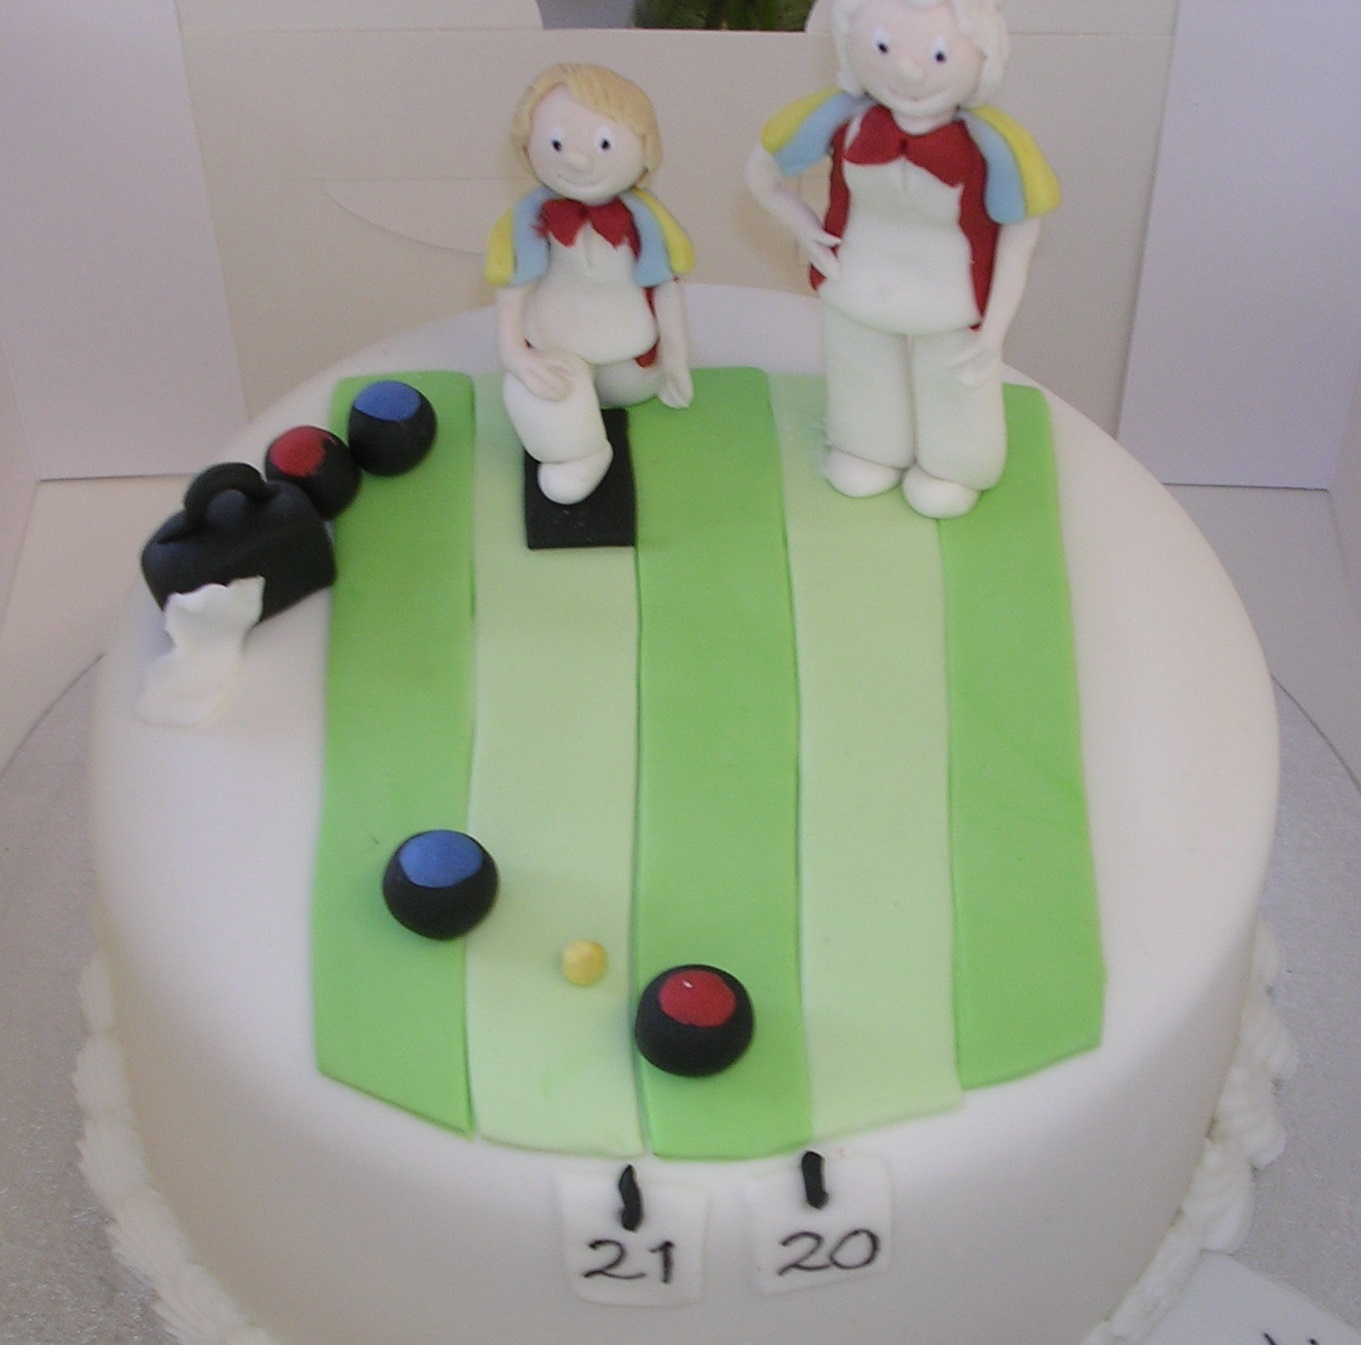 cake with decoration of bowlers playing a game